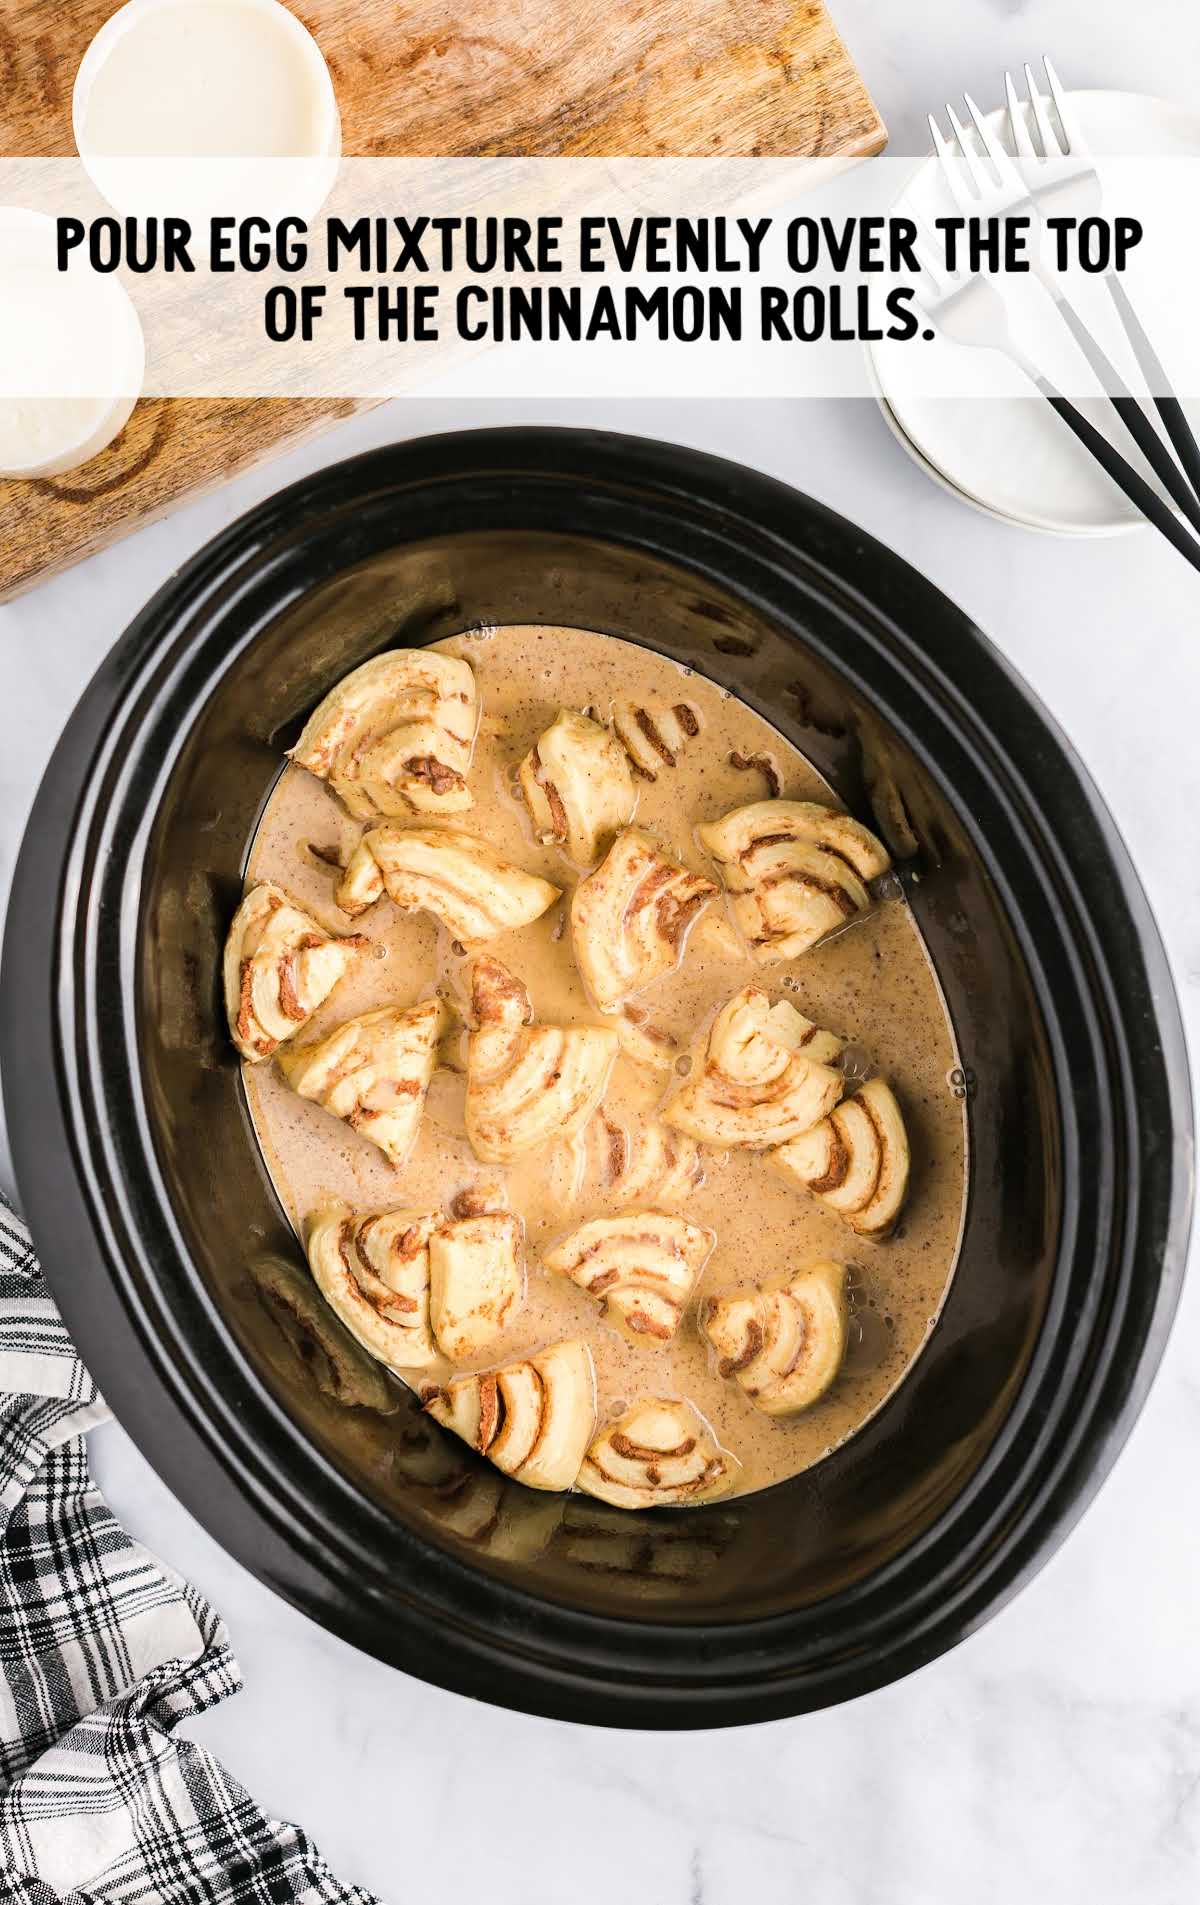 egg mixture poured over the cinnamon rolls in a crockpot